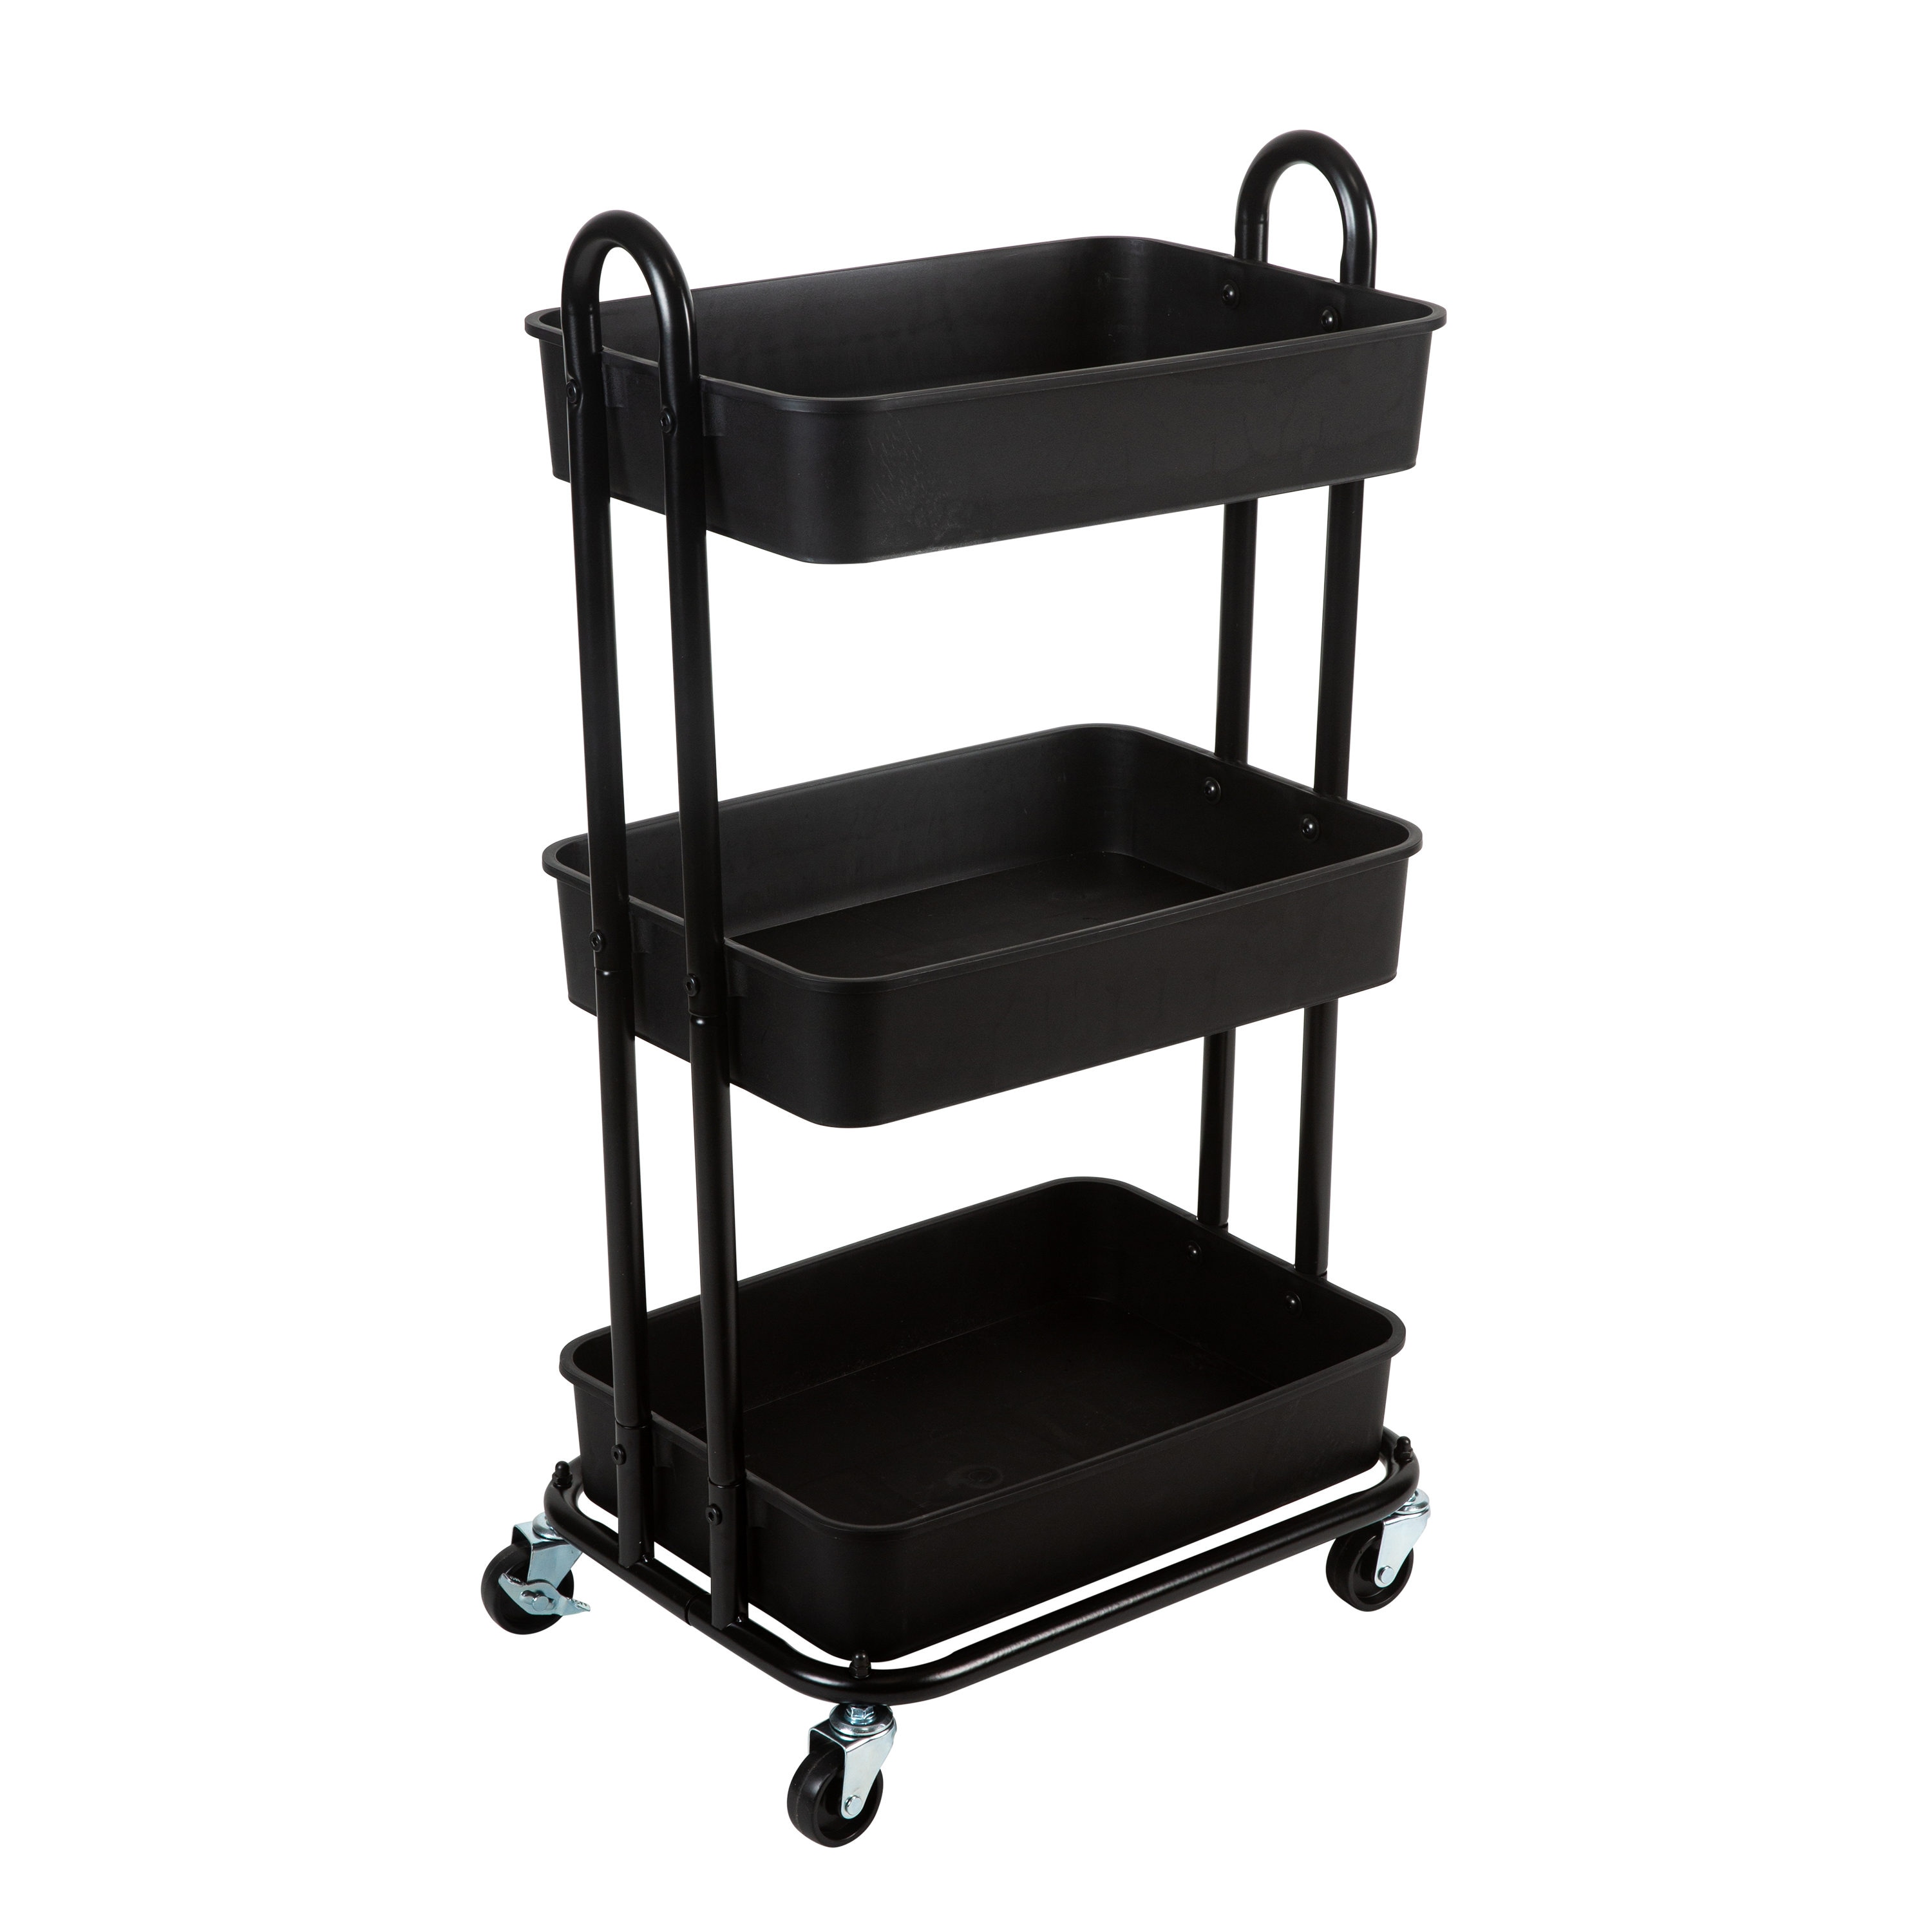 WEN Black Plastic Utility Cart - Two-Tray 300lb Capacity Double Decker  Service & Utility Cart - Multi-Level Storage - 4-inch Swivel Casters in the Utility  Carts department at